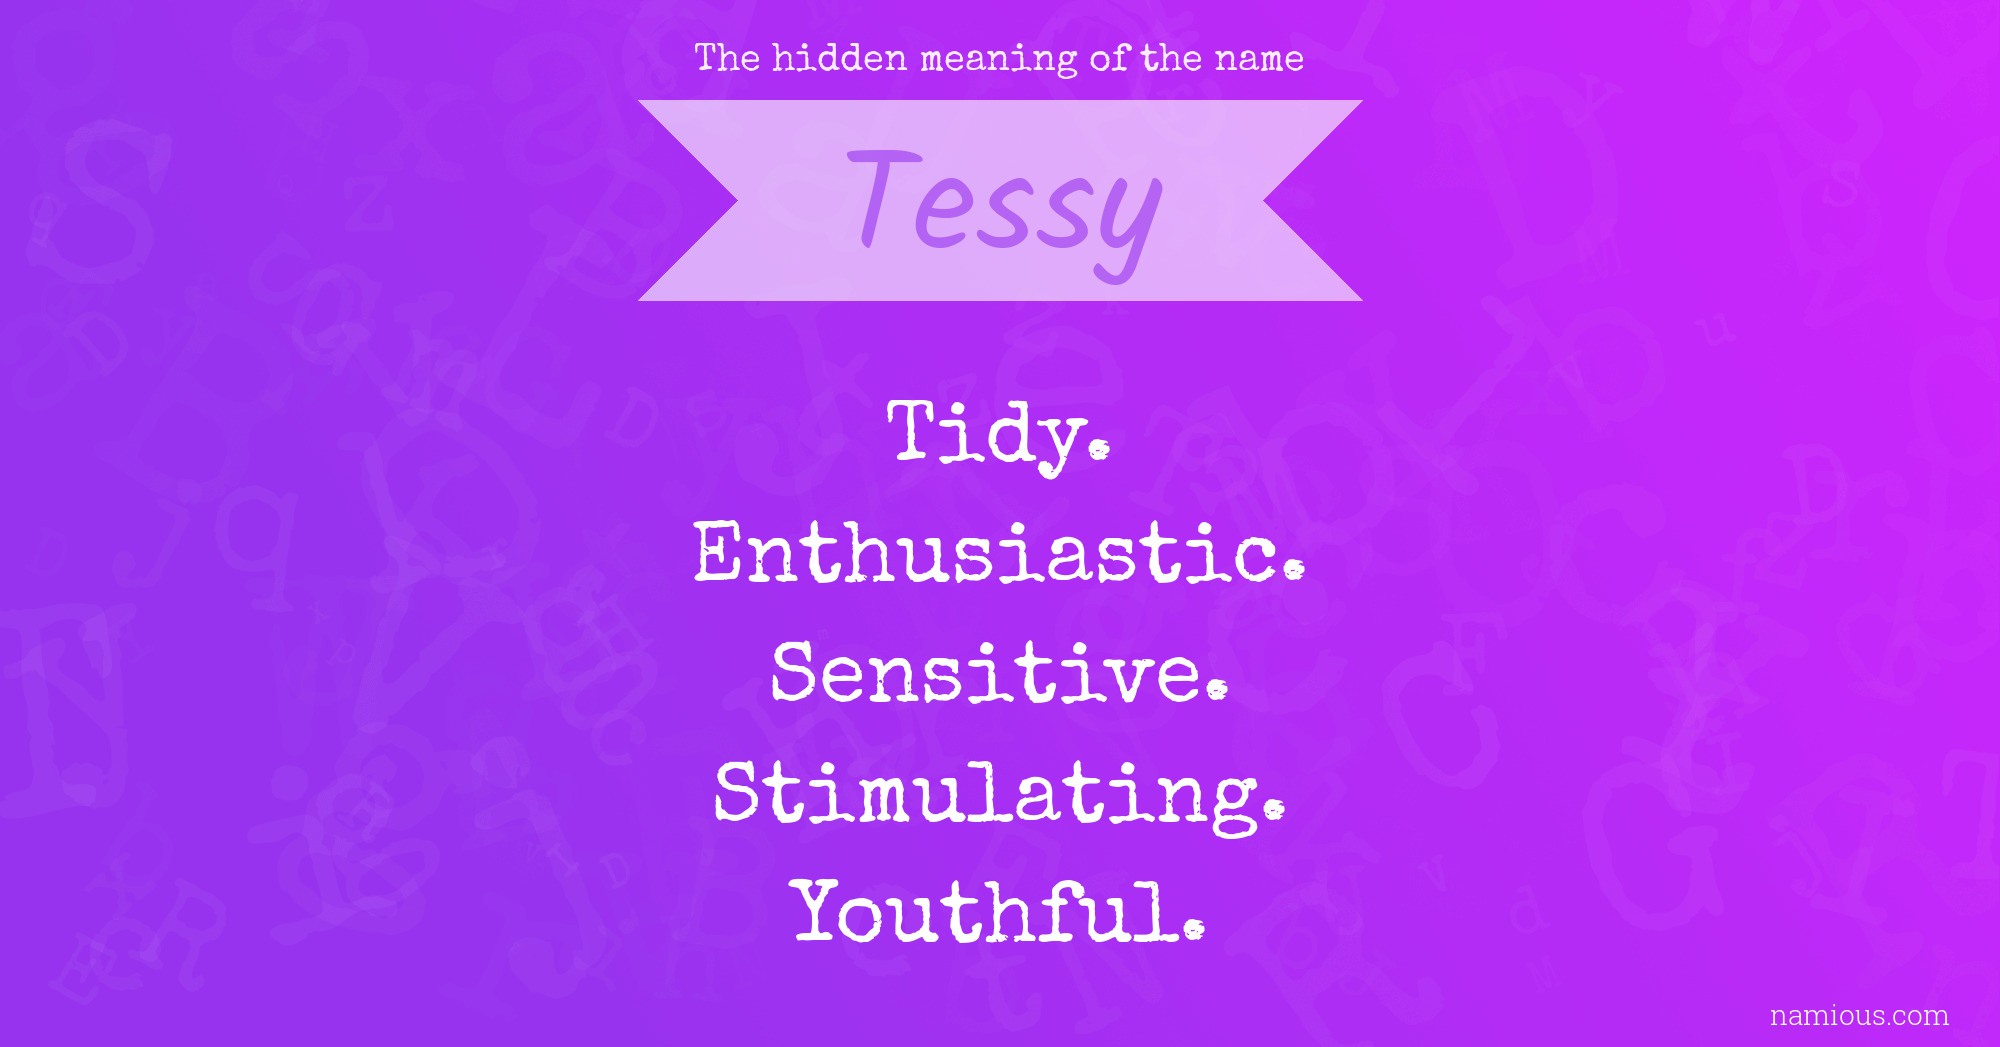 The hidden meaning of the name Tessy